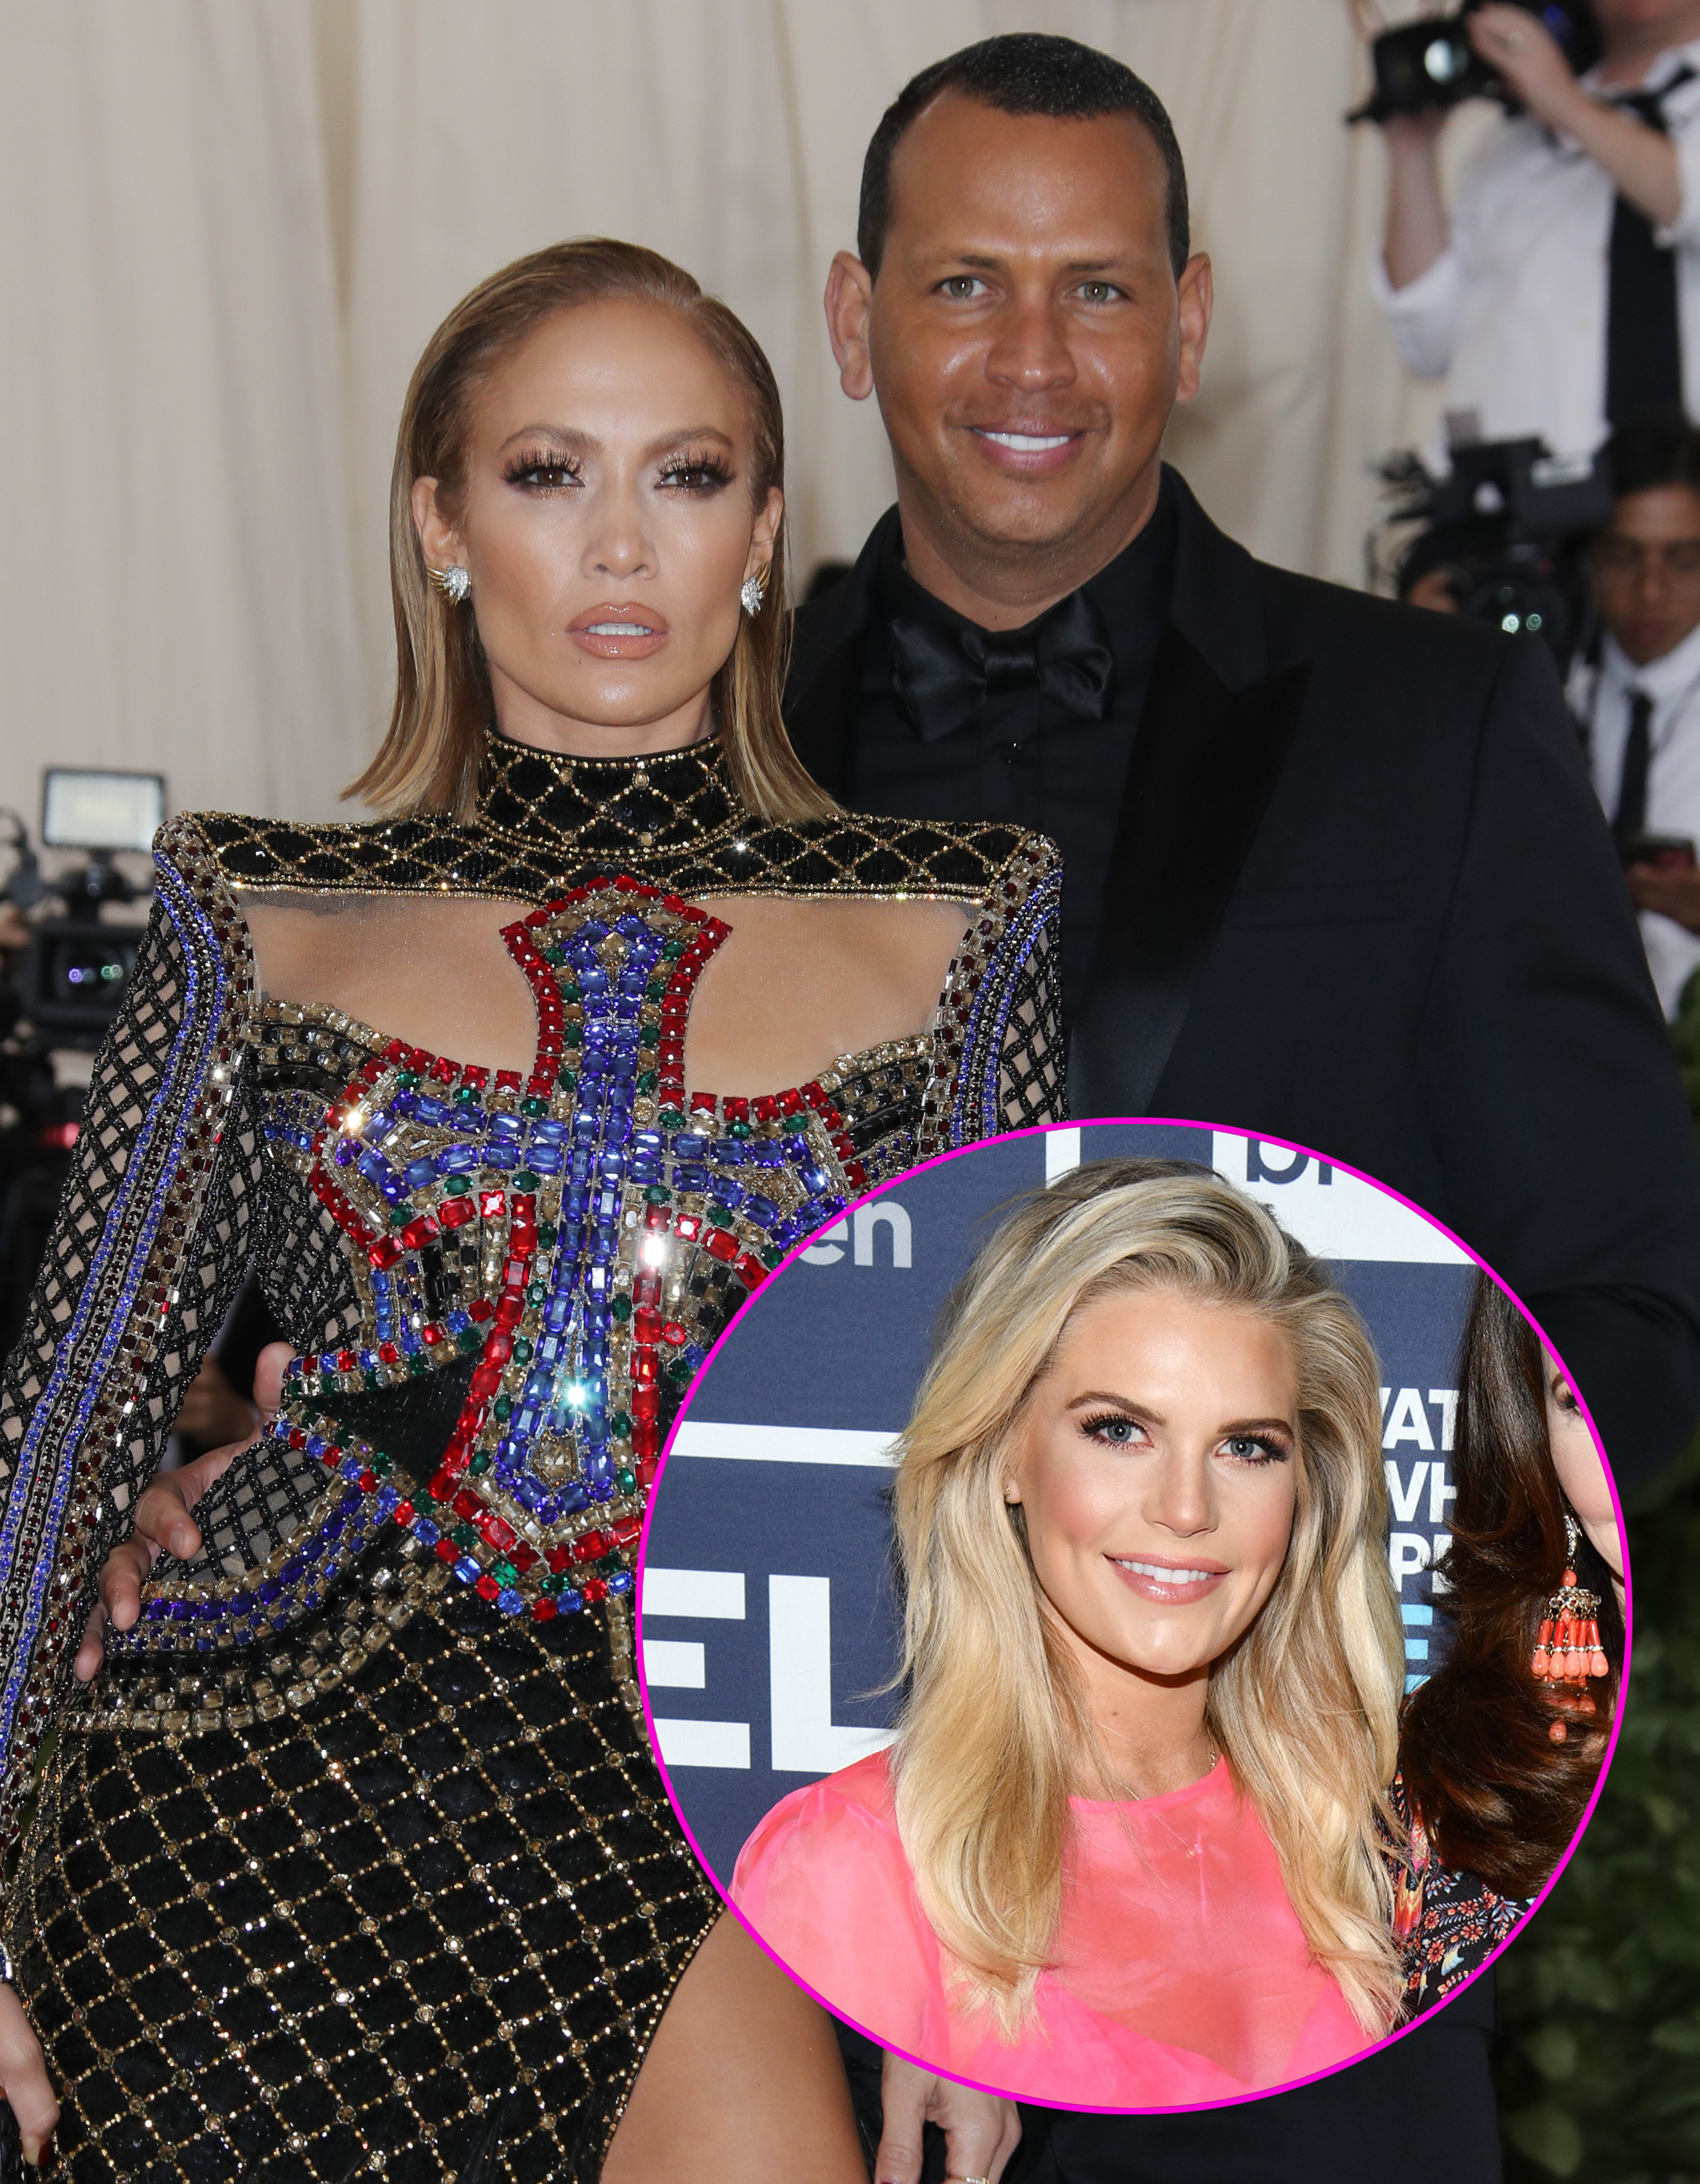 <p><span>In April 2021, <a href="https://www.wonderwall.com/celebrity/profiles/overview/jennifer-lopez-307.article">Jennifer Lopez</a> and Alex Rodriguez announced they'd </span><a href="https://www.wonderwall.com/celebrity/couples/housewives-stars-affair-with-rocker-revealed-plus-more-celeb-love-news-romance-report-april-2021-446054.gallery?photoId=439555">ended their four-year romance and two-year engagement</a><span> about a month after initially denying they'd broken up in the wake of the retired baseball star's latest cheating scandal. Though A-Rod had previously been accused of trying to arrange meet-ups with fitness model Lauren Hunter in 2017 and British Playboy model Zoe Gregory in 2018 -- both after he'd started seeing J.Lo -- it was a 2021 claim that </span><a href="https://www.wonderwall.com/celebrity/couples/paris-hiltons-fourth-engagement-plus-more-celeb-love-news-for-february-2021-428557.gallery?photoId=428617">he was acting shady with another woman</a><span> that made bigger headlines.</span></p><p>On a January 2021 reunion show taped in late 2020, a co-star accused "Southern Charm" personality Madison LeCroy of having an <a href="https://www.wonderwall.com/celebrity/couples/pamela-anderson-secret-marriage-bodyguard-tim-robbins-divorce-more-celeb-love-news-january-2021-romance-report-420739.gallery?photoId=1061571">affair with an ex-MLB player</a> in Miami who was soon identified as Alex. In February 2021, Madison admitted to Page Six that she'd communicated "on the phone" with Alex but insisted their involvement was "innocent" -- they "never met up," had "never been physical" and "never had any kind of anything" going on between them, she said. "He's never physically cheated on <a href="https://www.wonderwall.com/celebrity/couples/jennifer-lopez-alex-rodriguez-engaged-celeb-love-life-news-mid-march-2019-hollywood-romance-report-3018774.gallery">his fiancée</a> with me," she insisted -- which many thought was a curious choice of words. An Alex-friendly source told Page Six that A-Rod didn't know Madison and "definitely didn't hook up with her." But the source didn't deny that he slid into her DMs, as fans confirmed A-Rod followed the Bravo star on Instagram and had liked several of her thirst-inducing photos. As the scandal started heating up online, social media sleuths noticed Alex unliked several of Madison's posts.</p><p>Fast-forward to May 2023 when Madison finally spilled more details. On an episode of Austen Kroll's "Pillows and Beer" podcast, Madison — who was dating Austen at the time of the scandal — revealed that A-Rod kicked things off by asking her what gyms in her neighborhood were open amid COVID-19 lockdowns. She said she didn't believe it was him at first. "I'm being f****** catfished. The dude who's dating [J.Lo] is not in my DMs right now," she said she told herself. "I told [A-Rod], I said, 'If you're looking for a side chick,' which clearly he was, 'it wasn't gonna be me.' I'm wifey material." Austen chimed in too, sharing, "He kept on FaceTiming you ad nauseam. You were like, 'This mother f*****'s FaceTimed me three or four times today.' And then he, like, got mad at Madison because she didn't answer when she was on the boat or something. And she was like, 'I'm not at your beck and call.'" Madison also said A-Rod offered to fly her to Miami on multiple occasions and even sent her travel itineraries for commercial flights, but she never went or saw him in person. A-Rod's rep issued a denial to <a href="https://pagesix.com/2023/05/18/madison-lecroy-alex-rodriguez-wanted-a-side-chick-while-with-jennifer-lopez/">Page Six</a>, saying, "Her 15 minutes of fame are up, and she is trying [to] get a 16th minute. Please stop wasting everyone's time with these false narratives. They were false two years ago and continue to be false."</p>